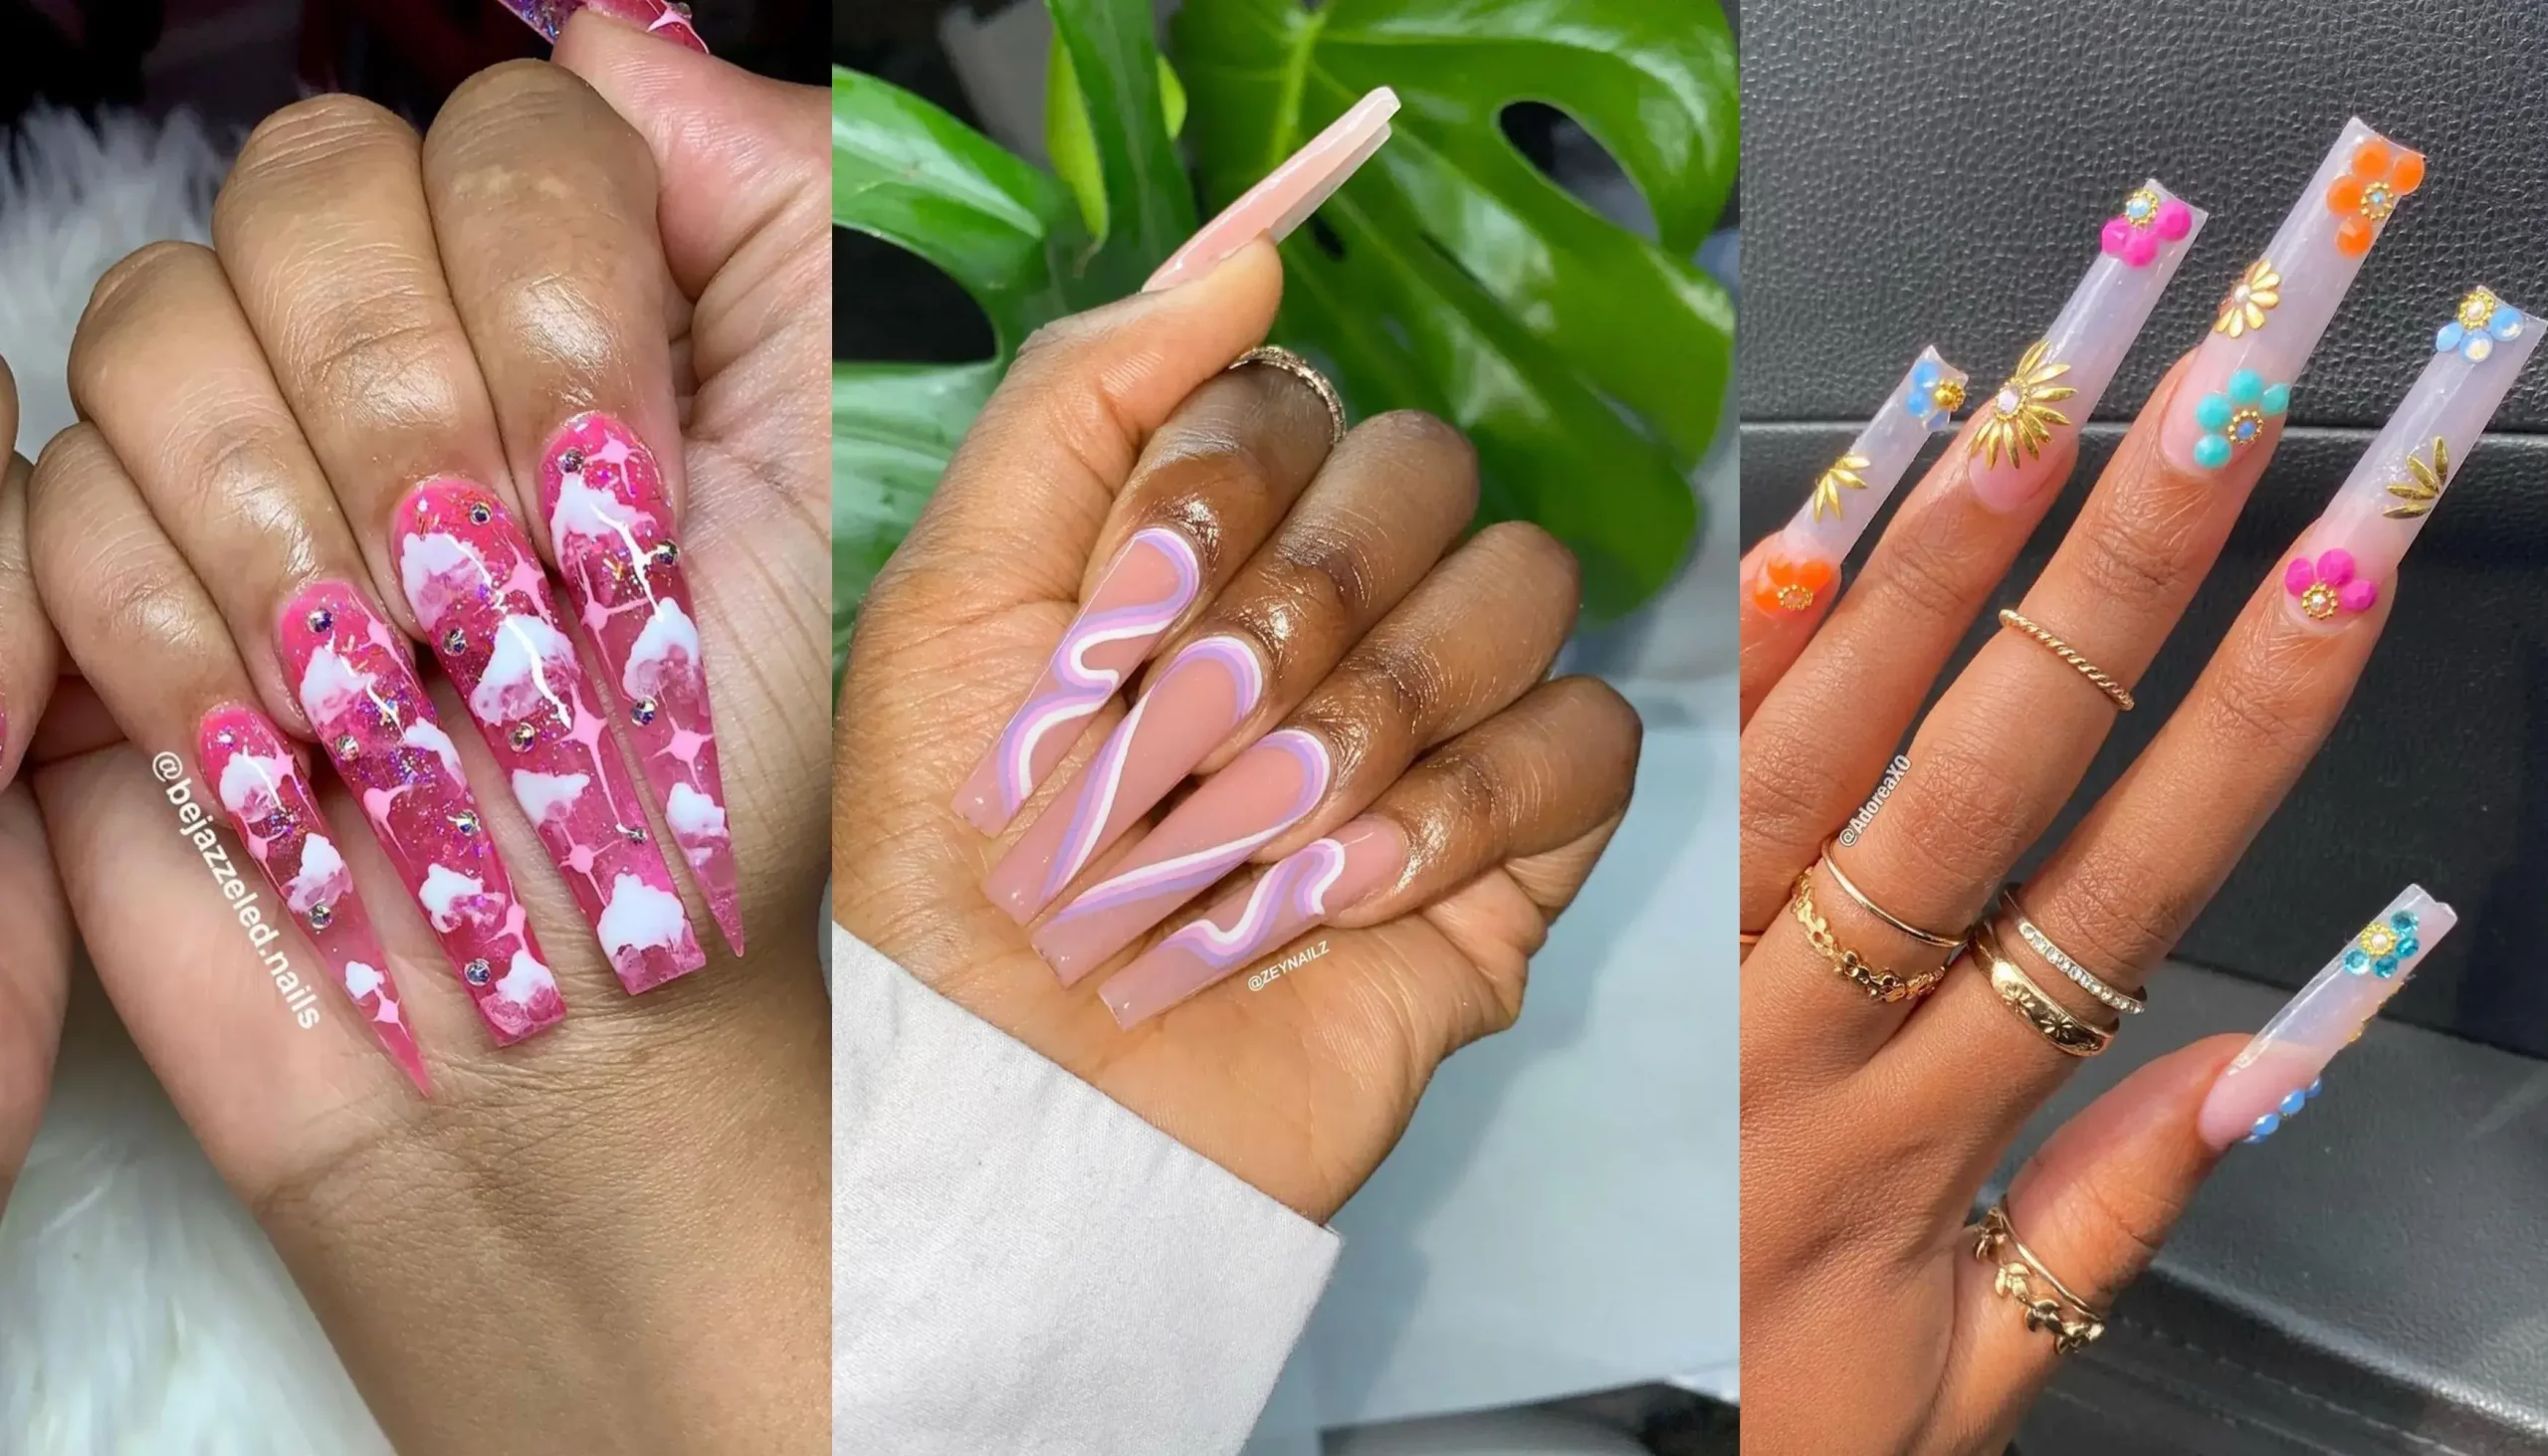 This swirl design of acrylic nails force you to fall in love with them